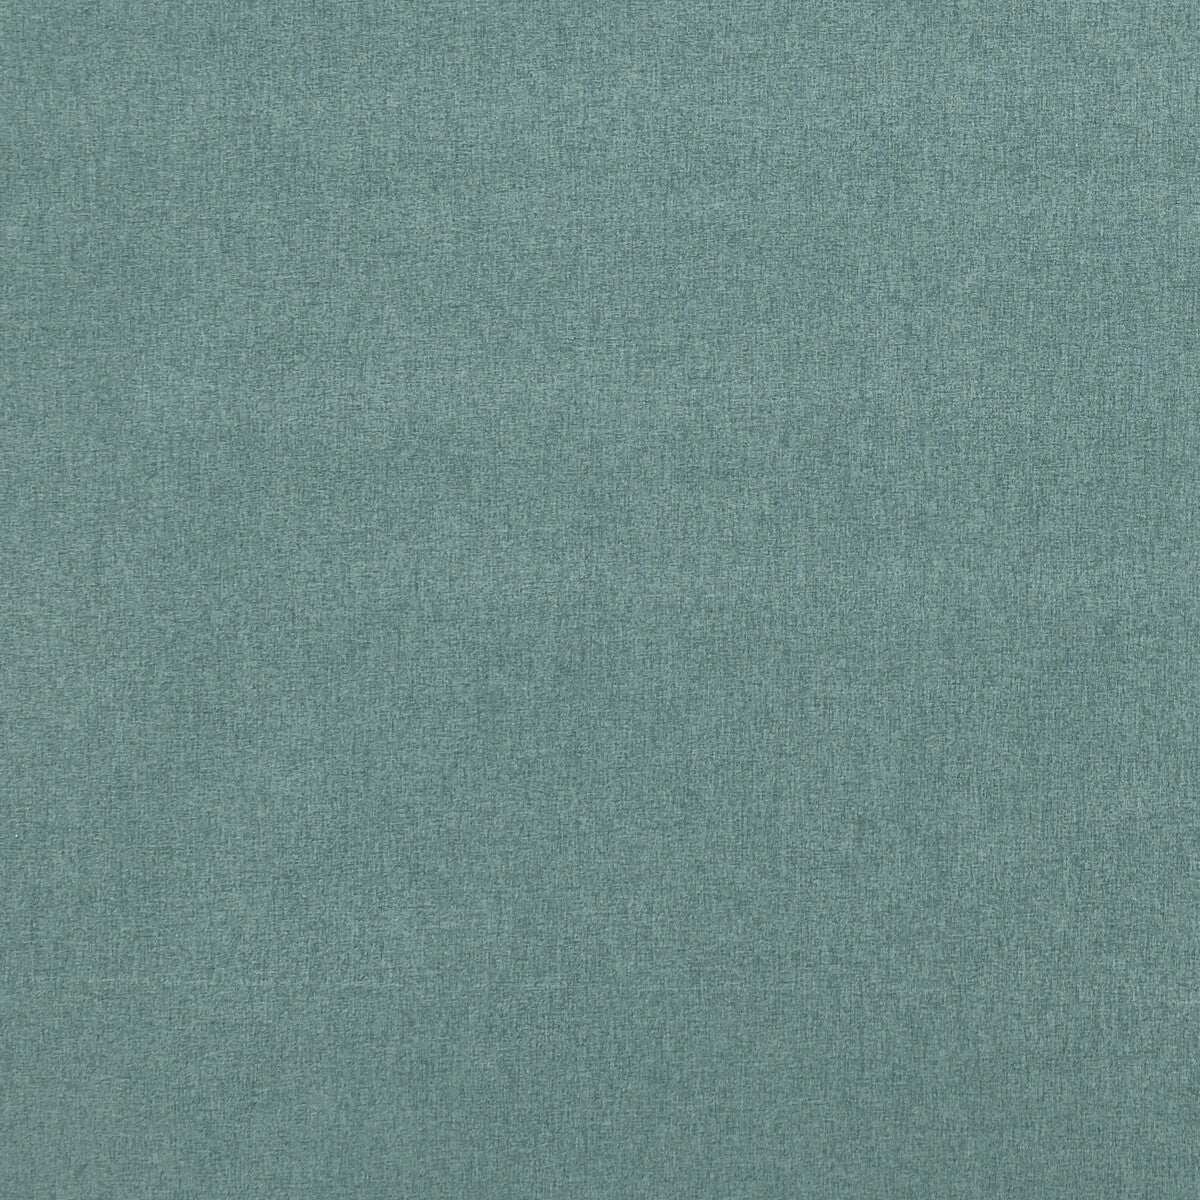 Highlander fabric in teal color - pattern F0848/27.CAC.0 - by Clarke And Clarke in the Clarke &amp; Clarke Highlander collection